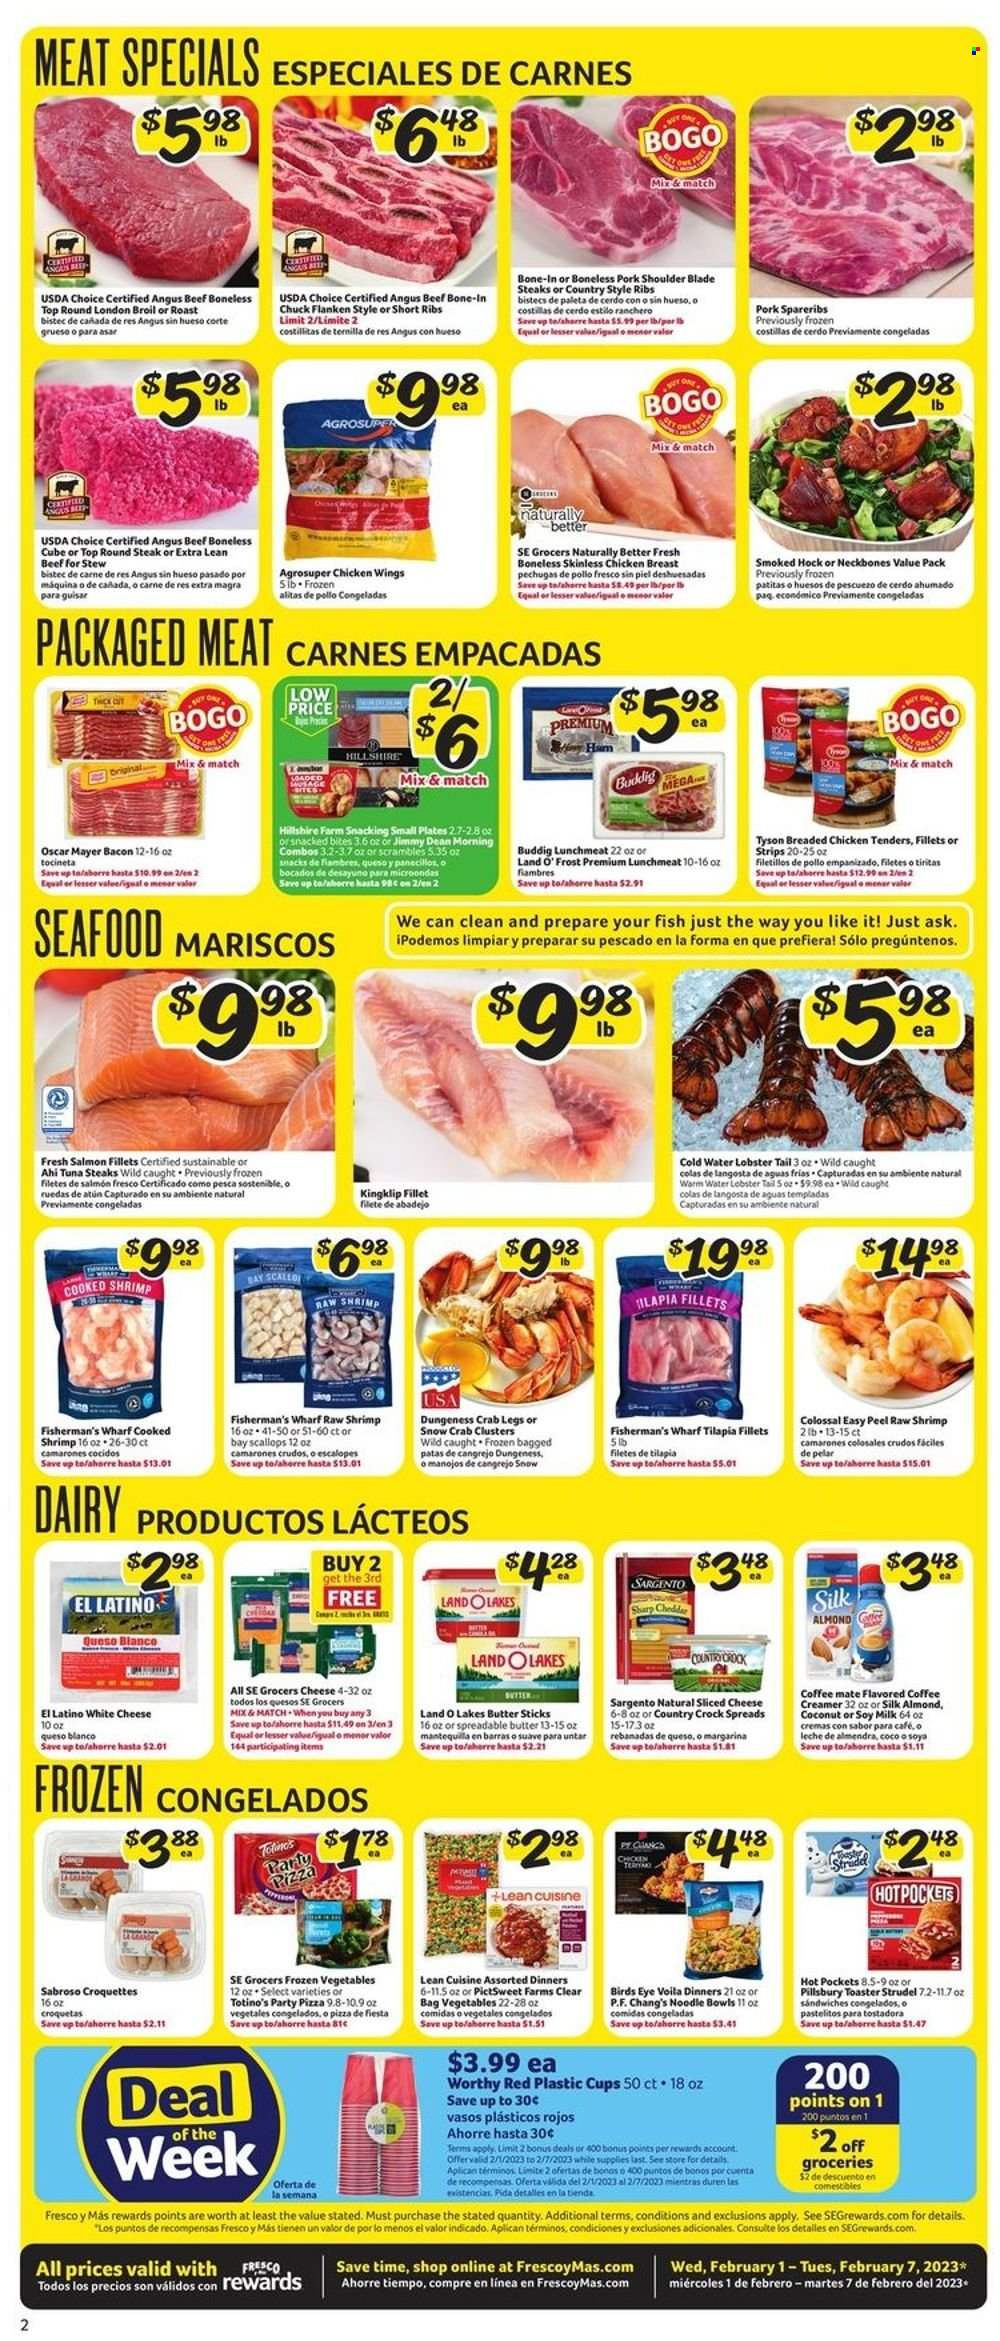 thumbnail - Fresco y Más Flyer - 02/01/2023 - 02/07/2023 - Sales products - strudel, coconut, lobster, salmon, salmon fillet, scallops, tilapia, tuna, seafood, crab legs, crab, fish, lobster tail, shrimps, hot pocket, pizza, fried chicken, Pillsbury, Bird's Eye, noodles, Lean Cuisine, Jimmy Dean, bacon, ham, Hillshire Farm, Oscar Mayer, lunch meat, sliced cheese, cheddar, Sargento, Coffee-Mate, soy milk, butter, spreadable butter, creamer, frozen vegetables, chicken wings, strips, potato croquettes, snack, beef meat, steak, round steak, ribs, pork meat, pork ribs, pork shoulder, pork spare ribs, country style ribs. Page 2.